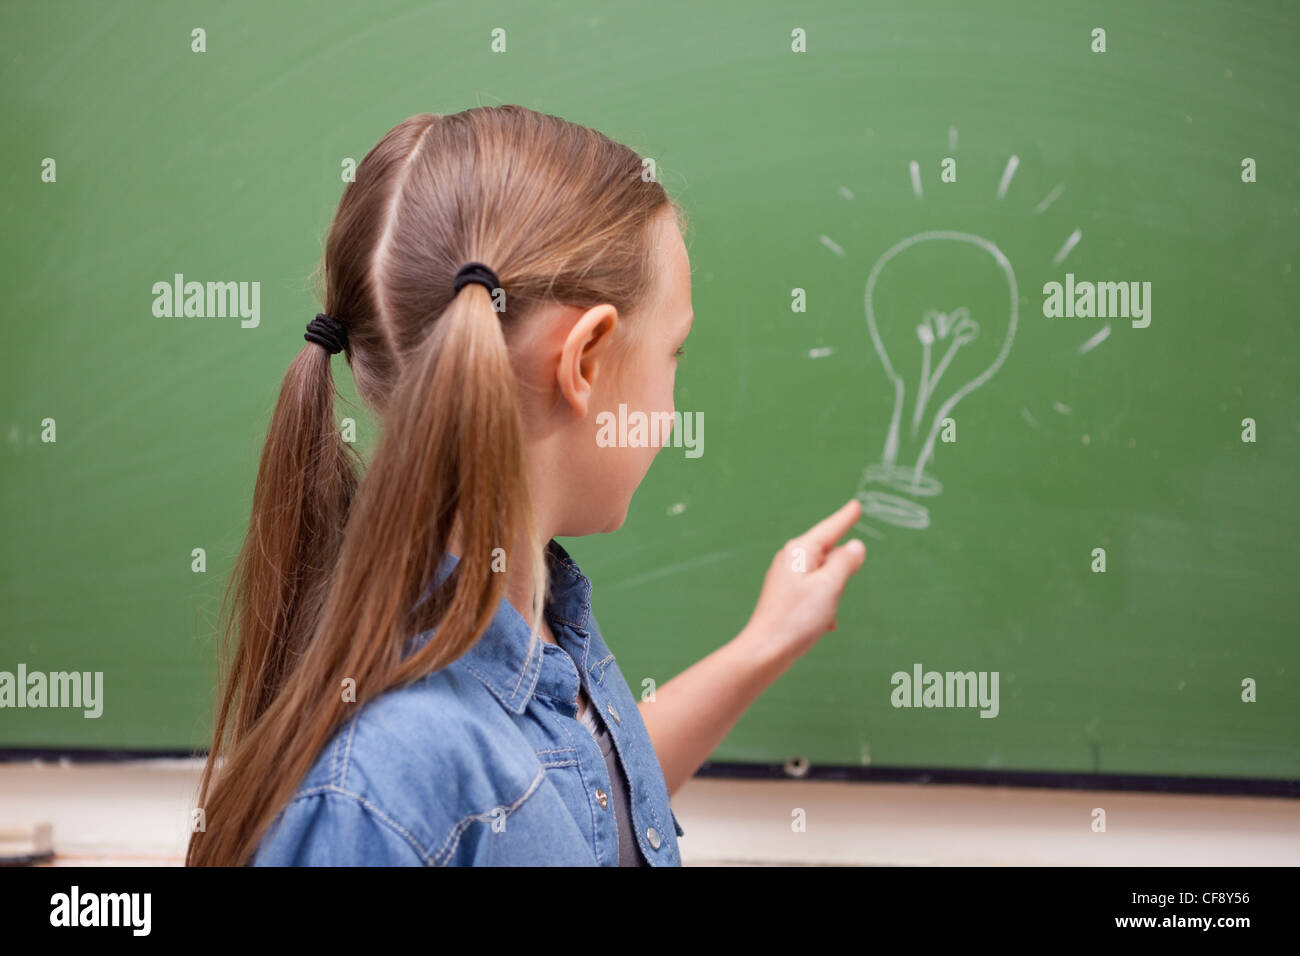 Schoolgirl pointing at a bulb Stock Photo